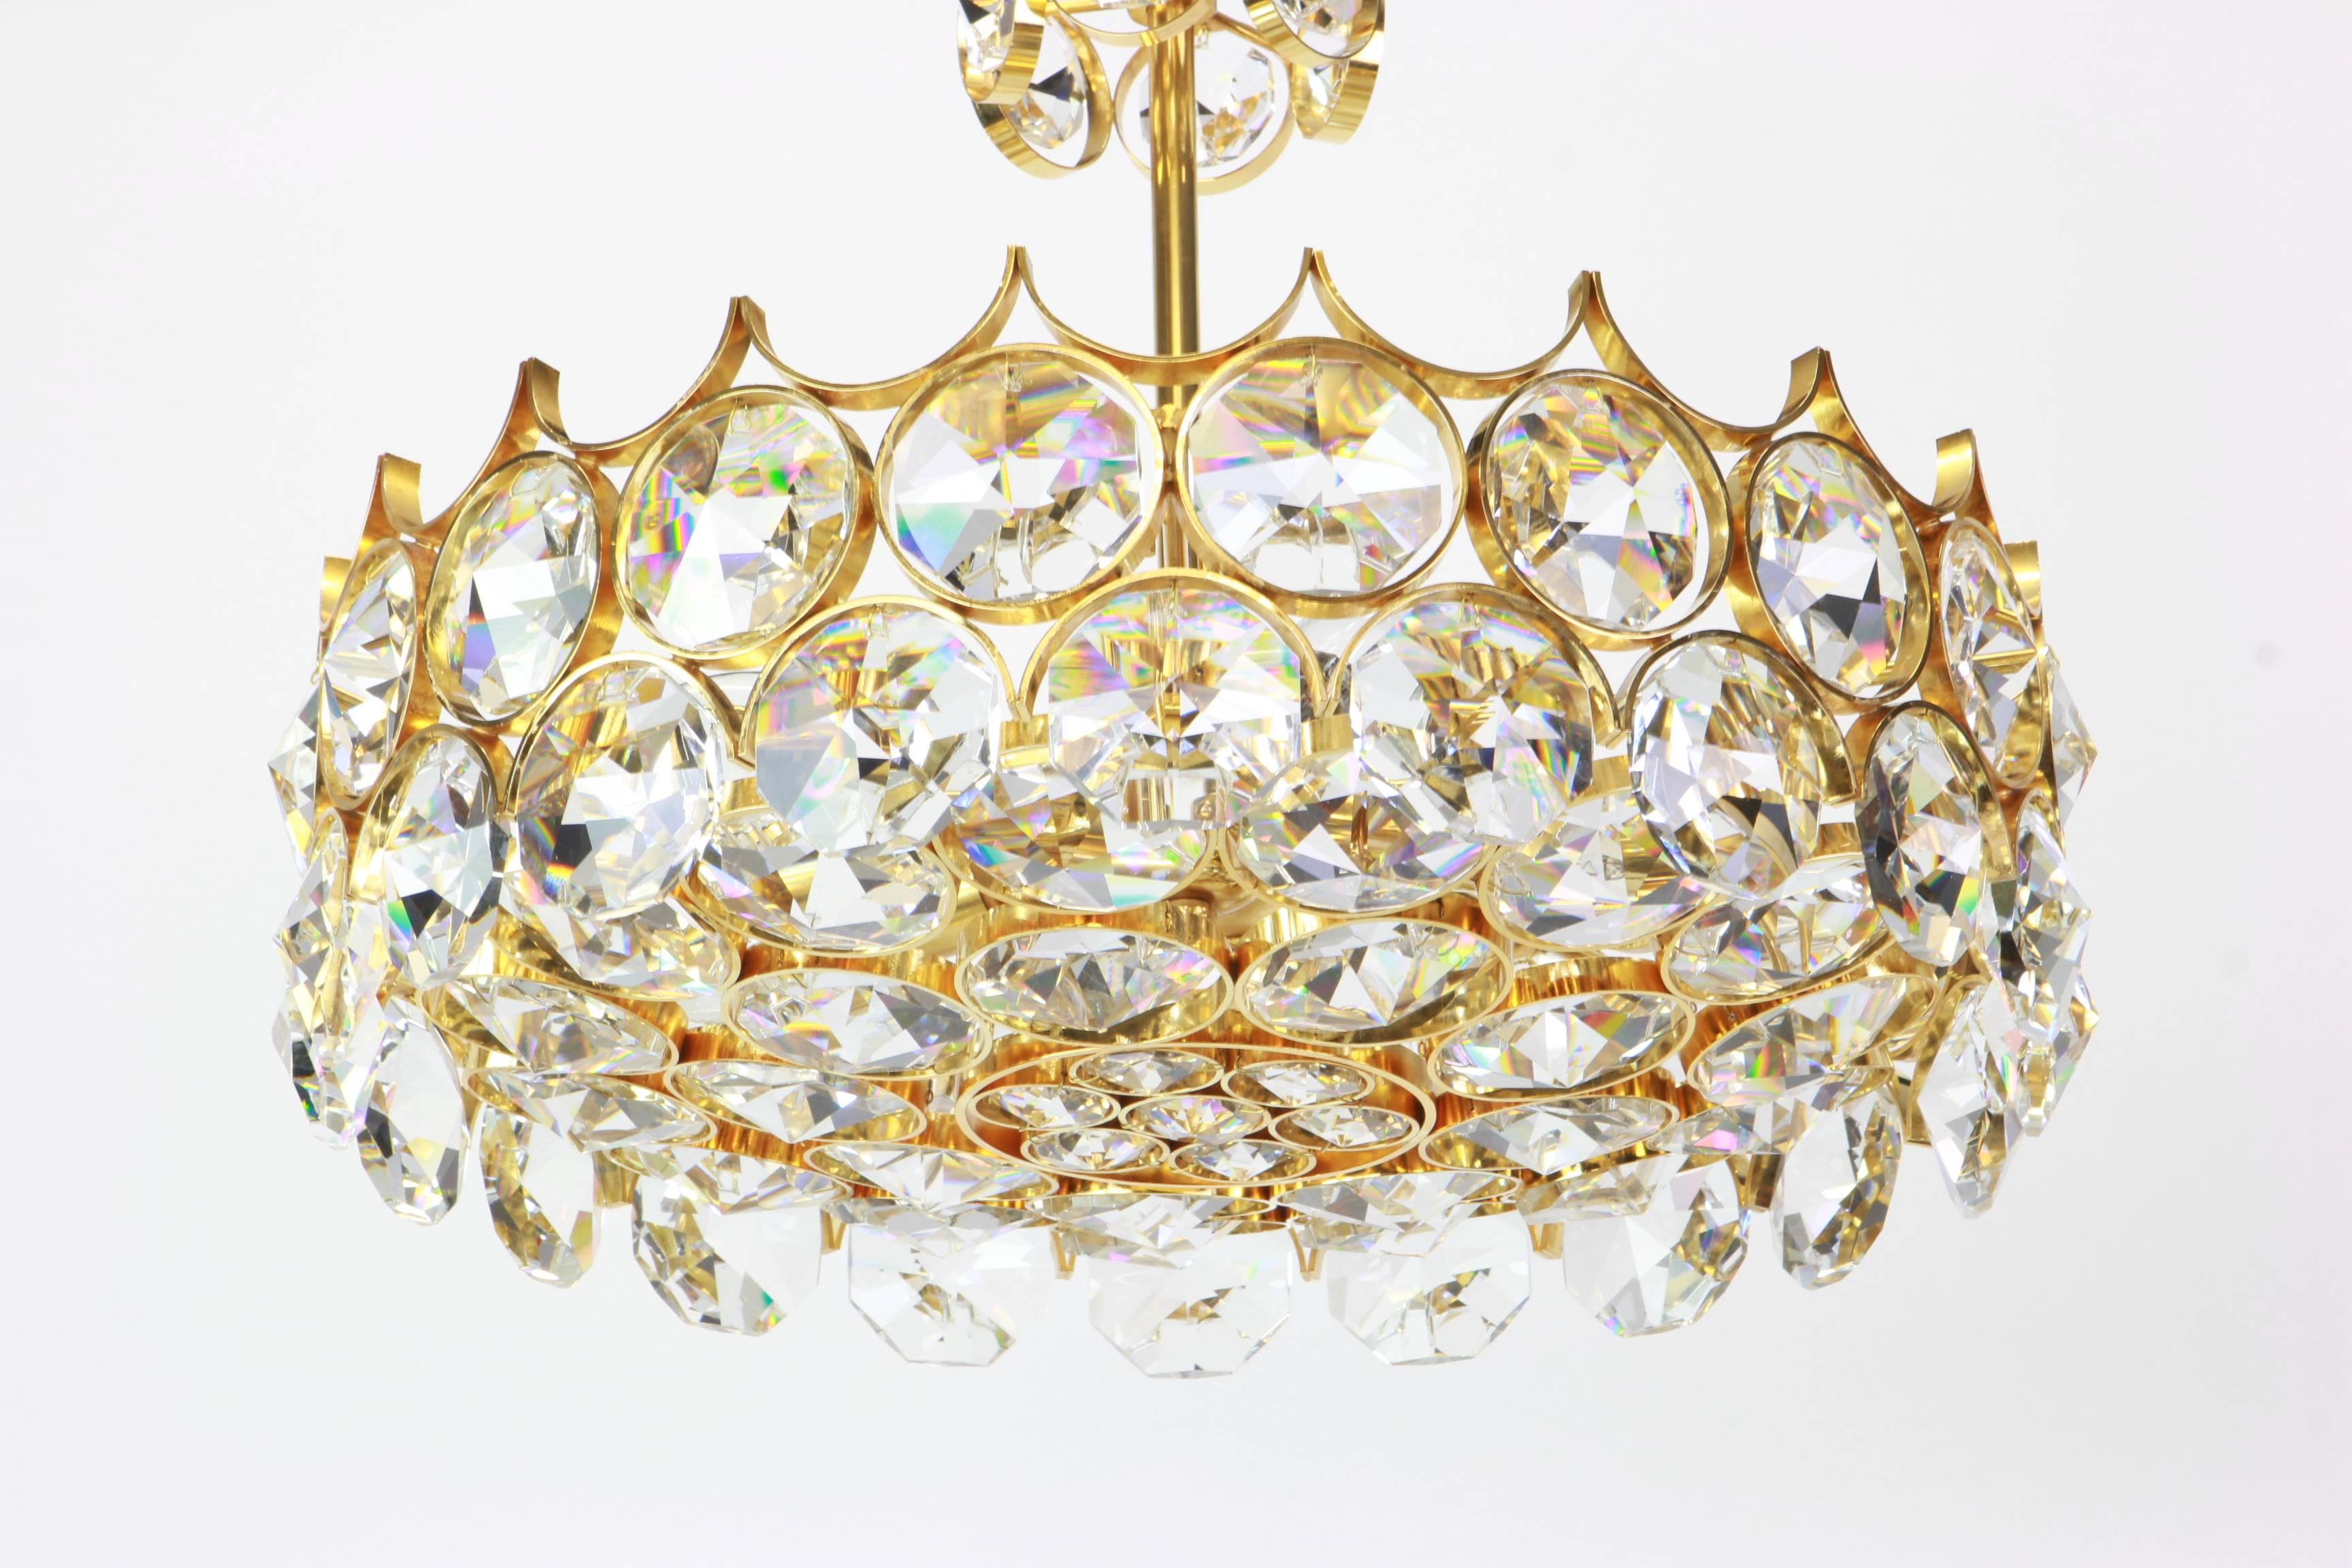 Mid-Century Modern 1 of 2 Gilt Brass and Crystal Glass Chandeliers by Palwa, Germany, 1970s